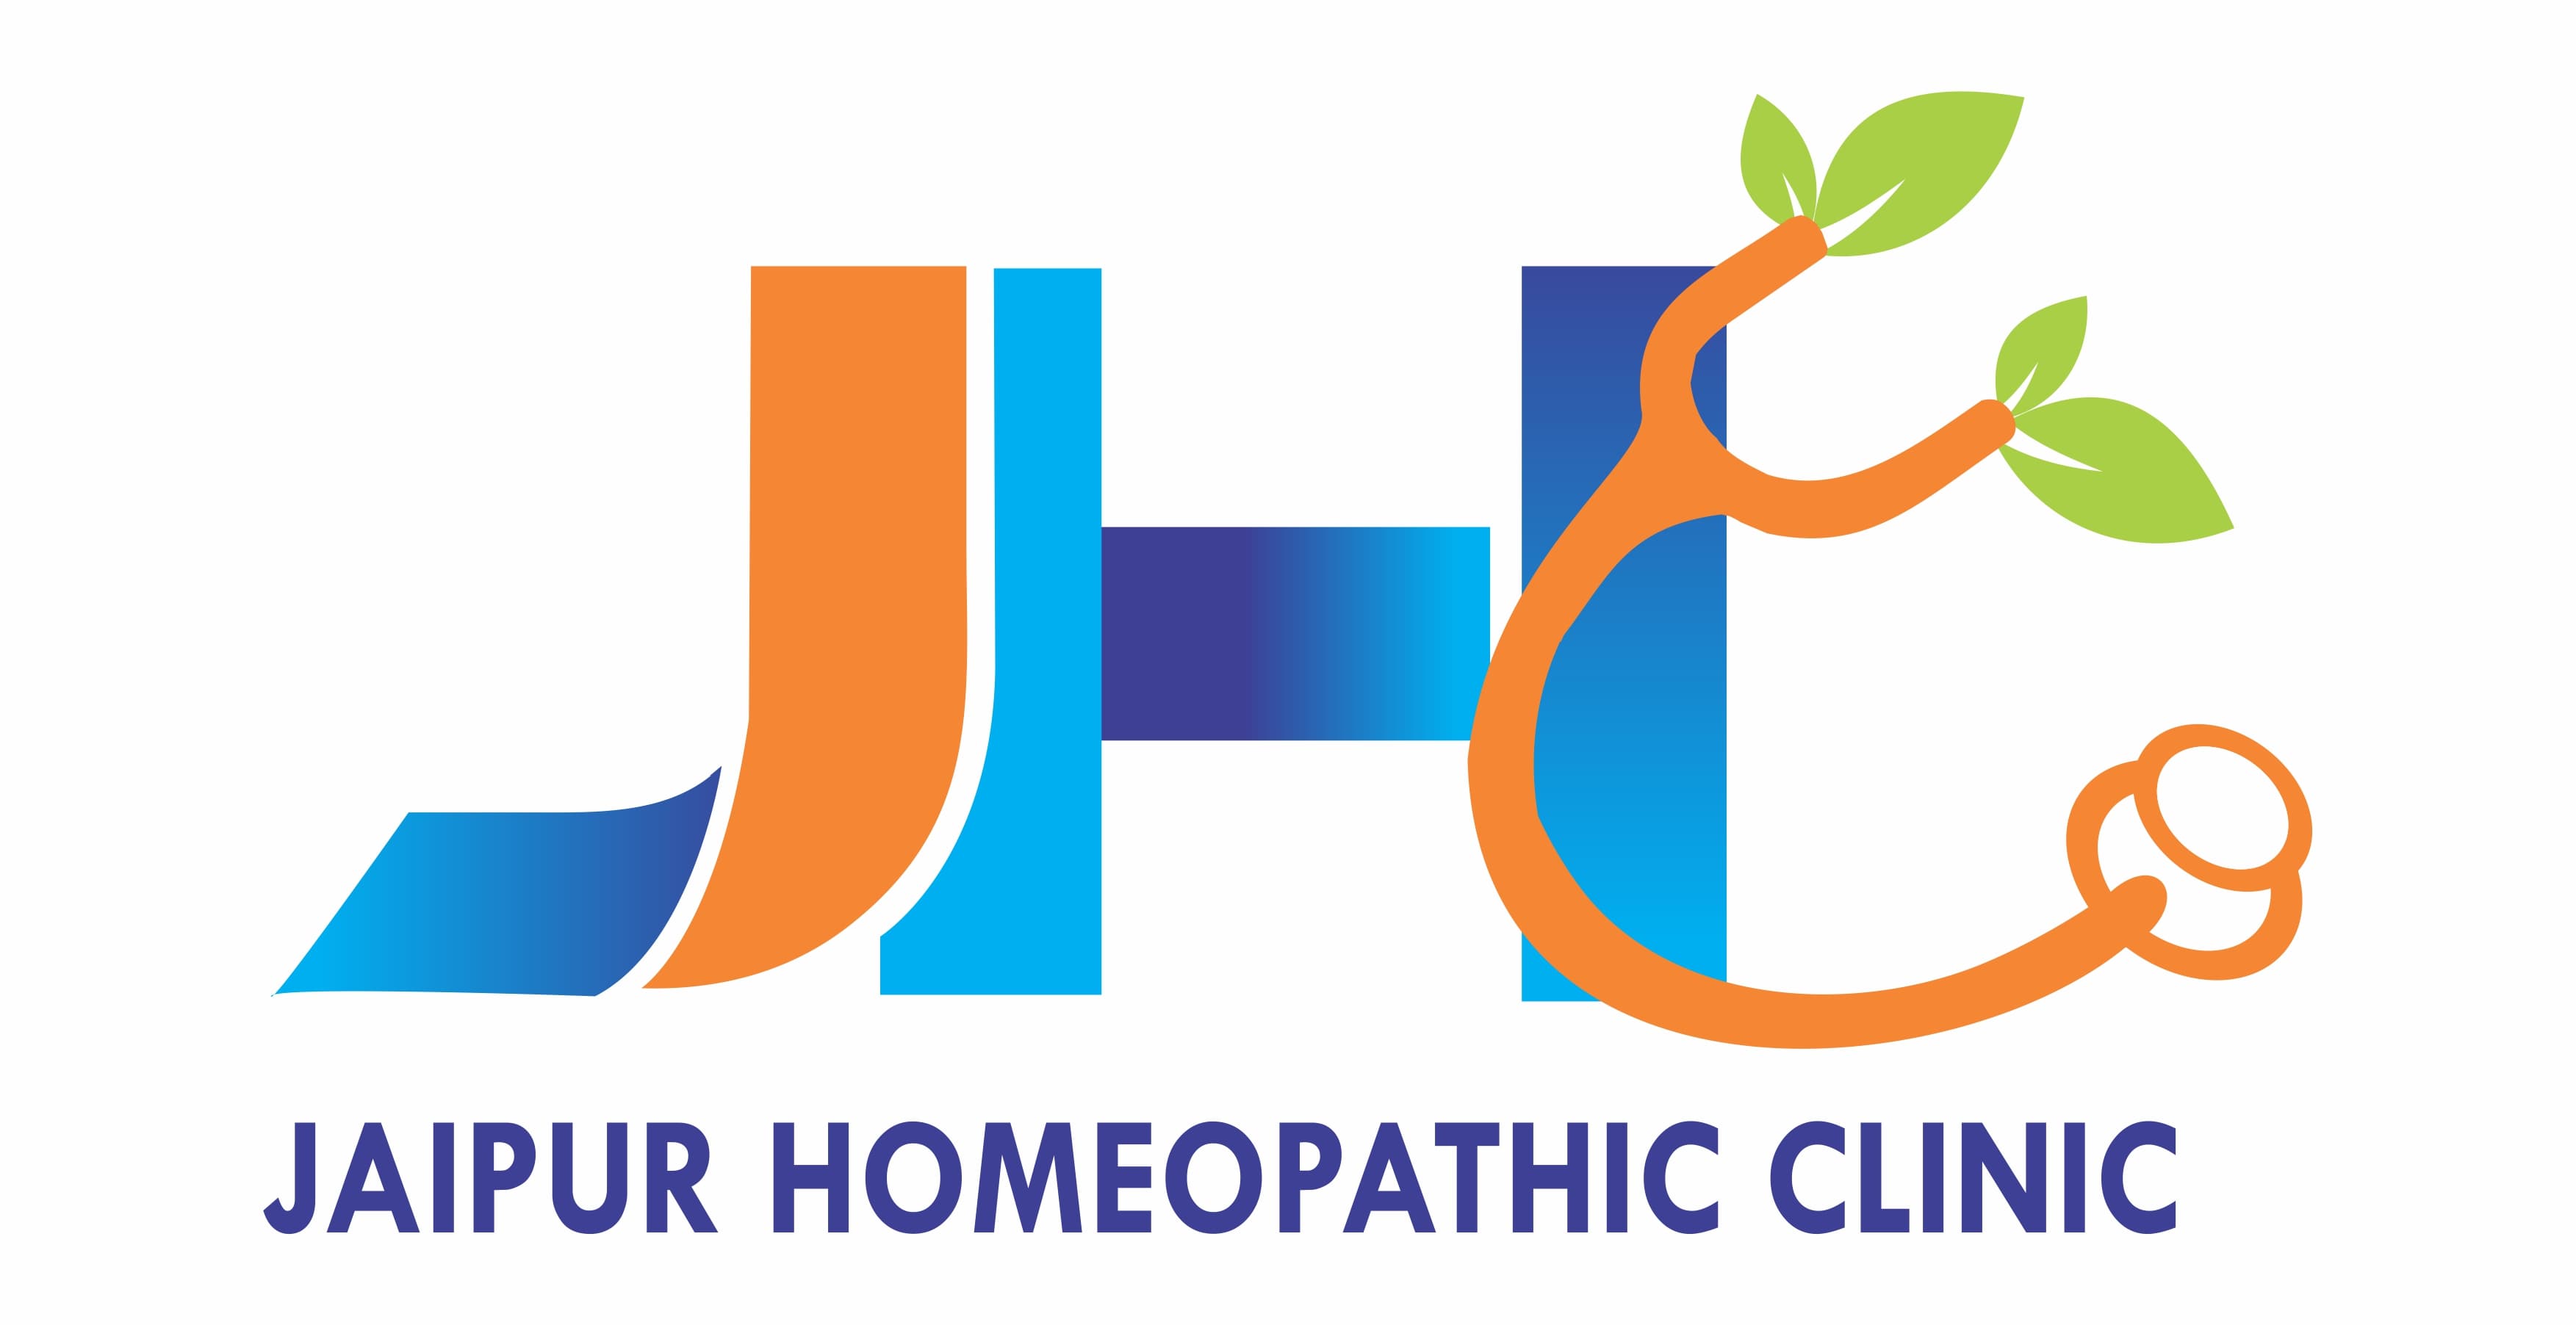 Dr. Jean's Homeopathic Clinic, Homoeopathy Clinic in Bangalore | Practo